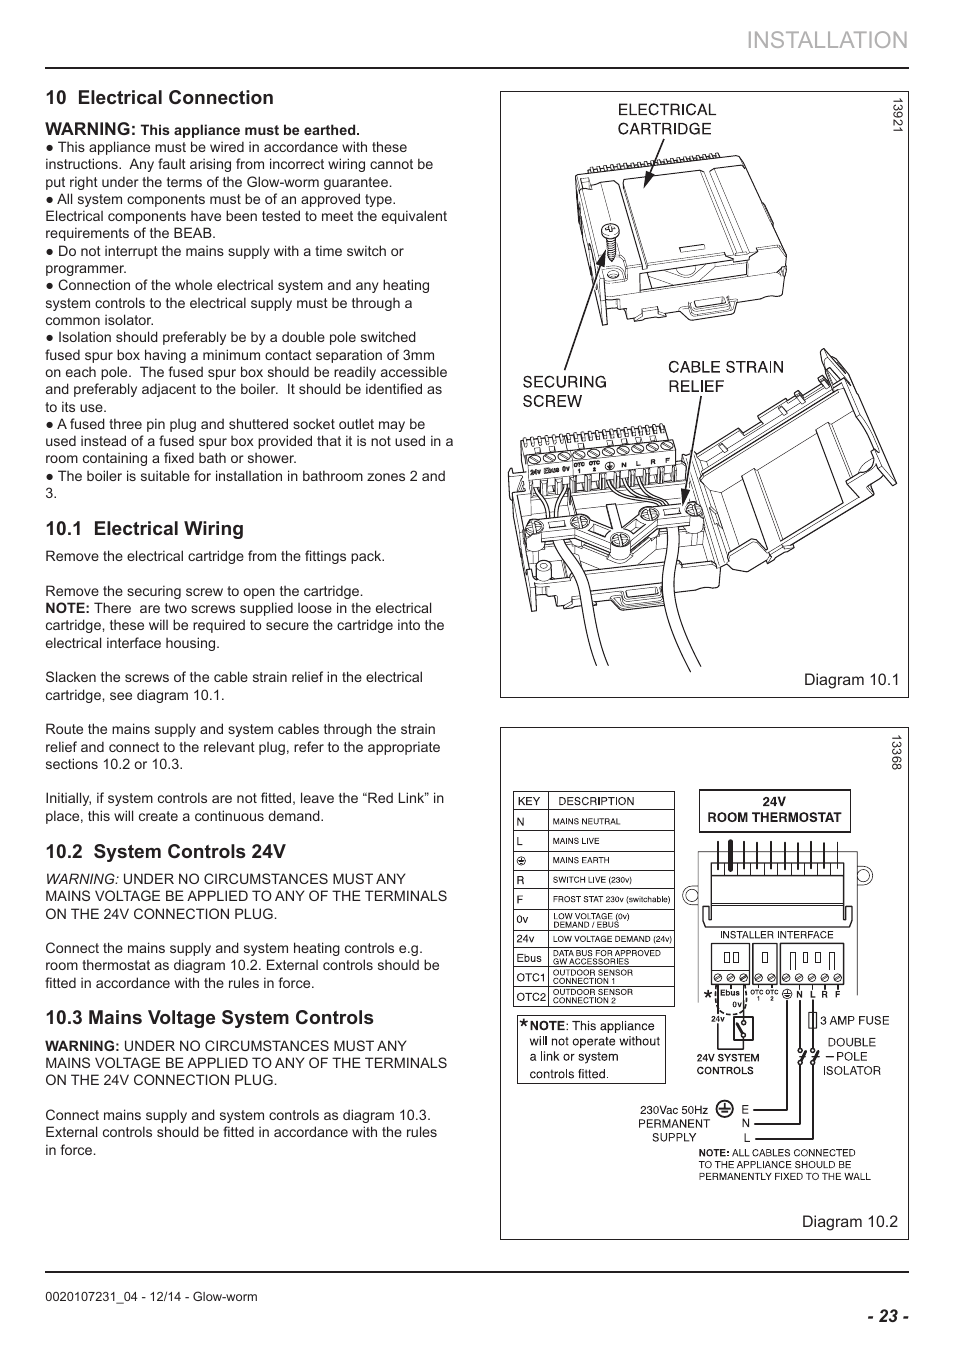 Installation, 10 electrical connection, 1 electrical wiring | Glow-worm  Flexicom sx User Manual | Page 23 / 52  Glow Worm Boiler Thermostat Wiring Diagram    Manuals Directory